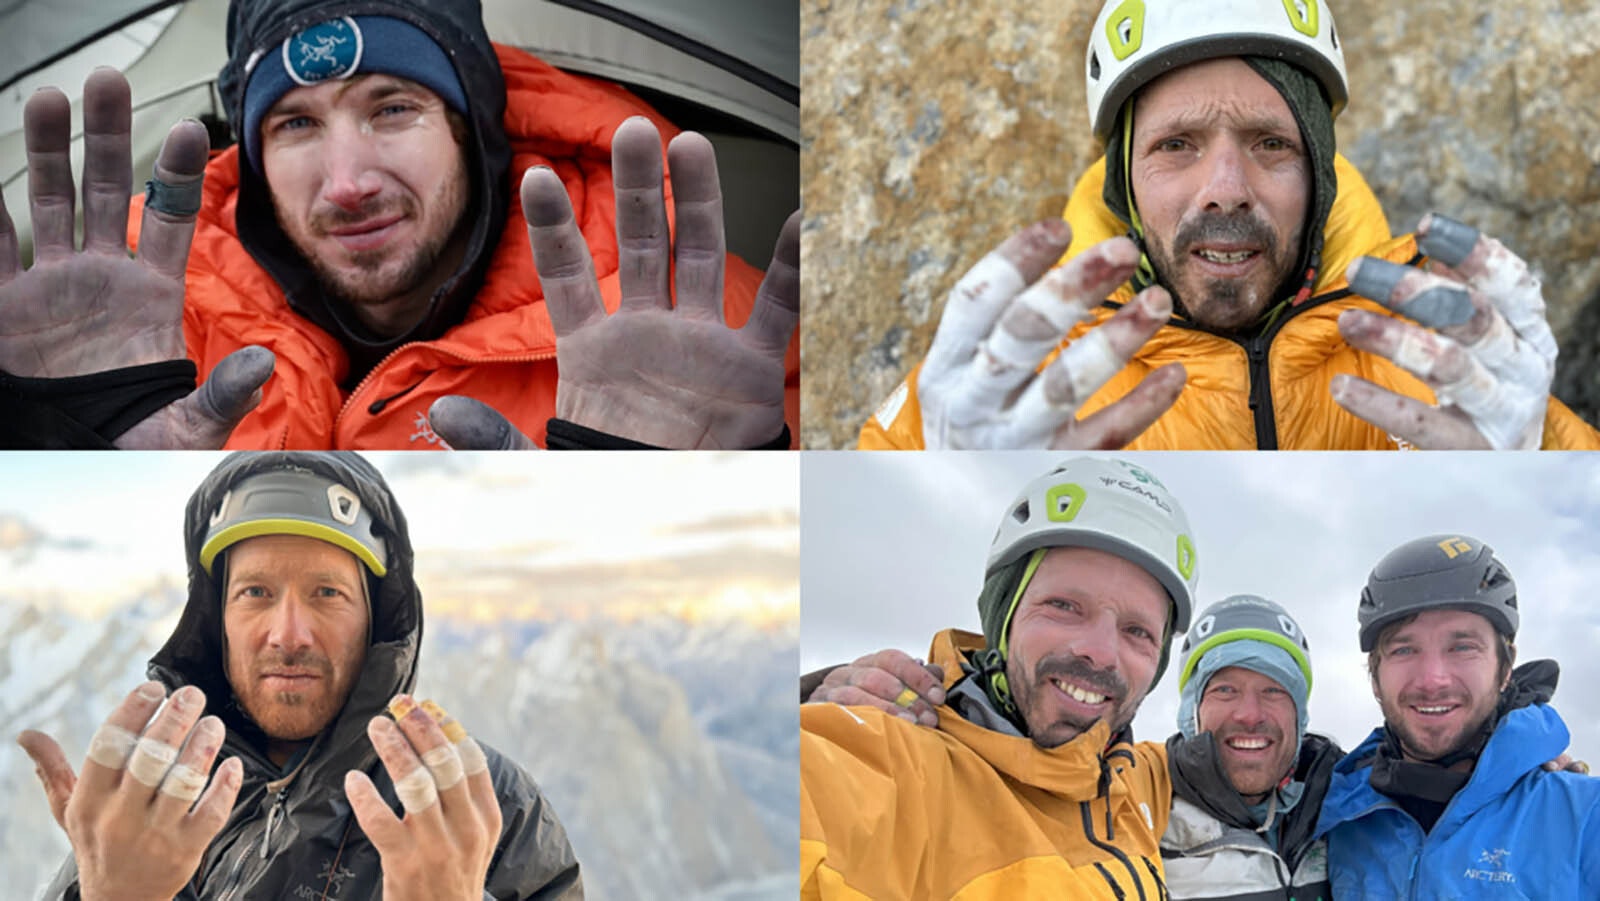 In July 2023, the trip of Jesse Huey, Matt Segal and Jordan Cannon became the second climbing team to make it up the Cowboy Direct route of Trango Towers.